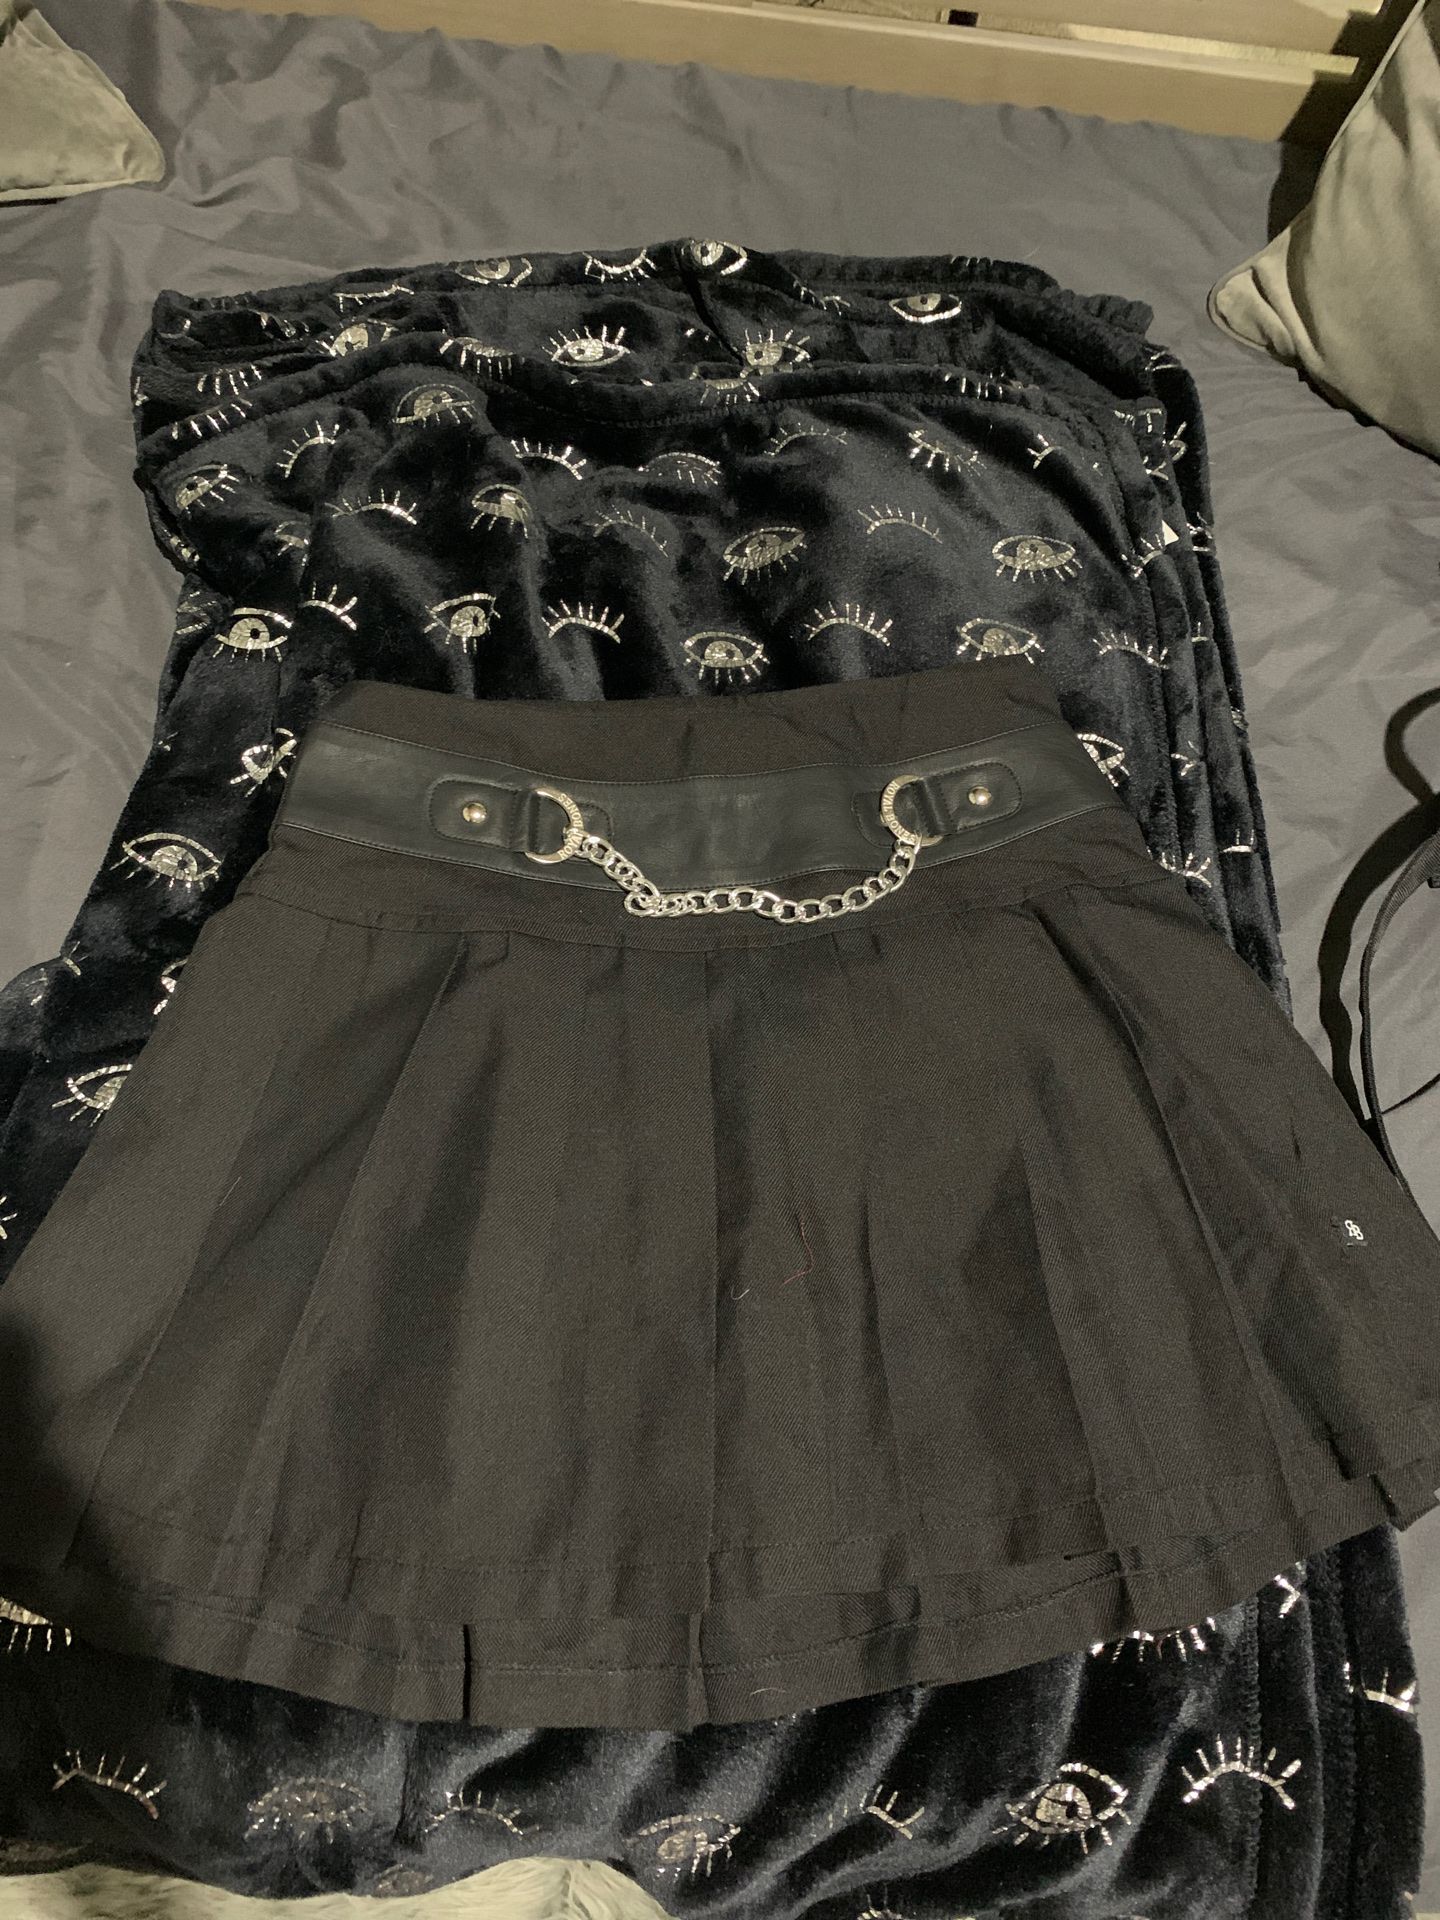 black skirt from Hot Topic. Size Small